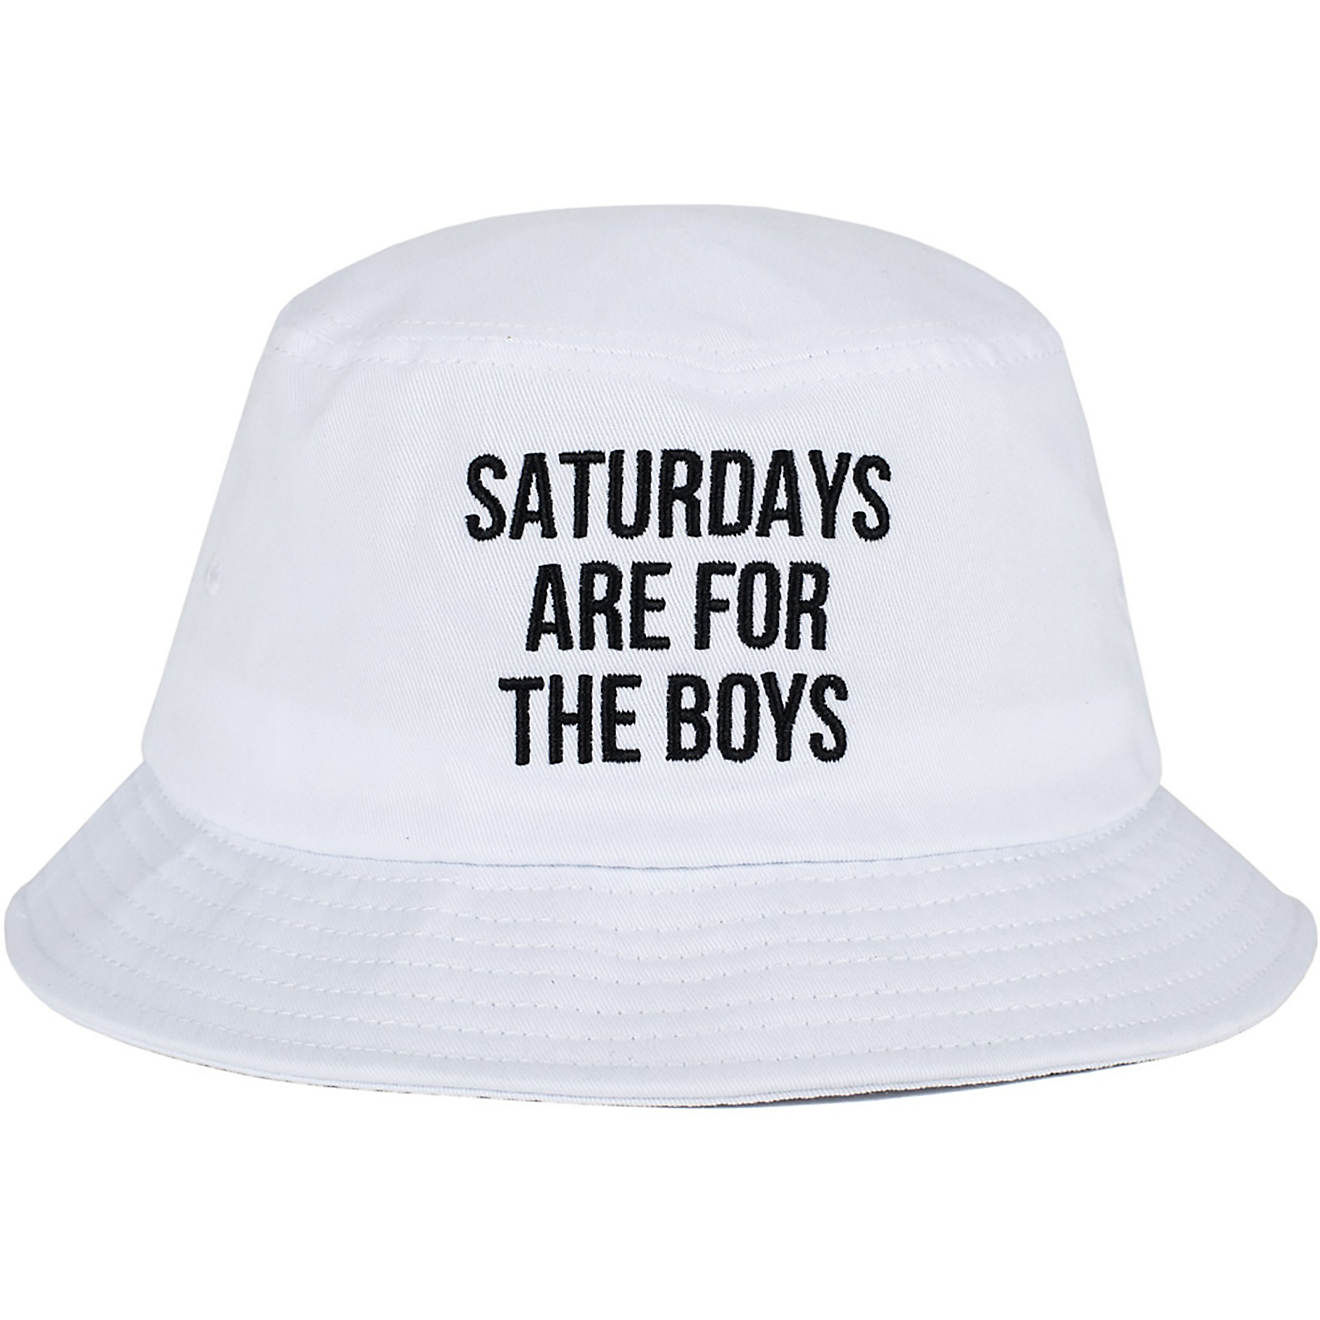 Barstool Sports Men's Saturdays Are For The Boys Bucket Hat                                                                      - view number 1